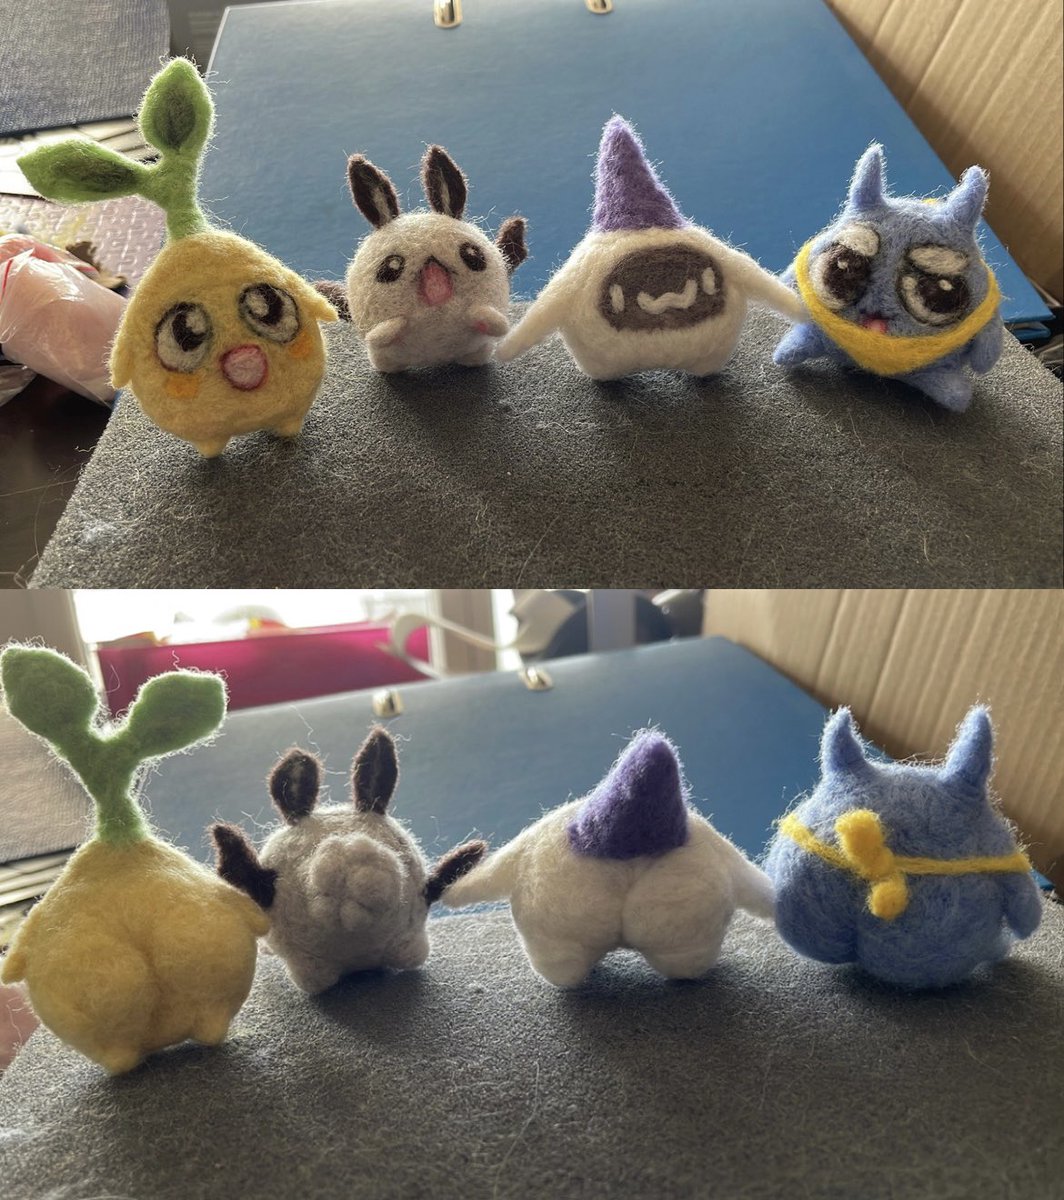 I made little needle felting plushies for 4 of the Vyugen members and gave it to them today at twitch con and all of them were unbelievably sweet and kind 🥺♥️pestie for @yuniiho bunnerd for @yenkoes chatblin for @dyarikku and onifan for @yoclesh thank you for everything!